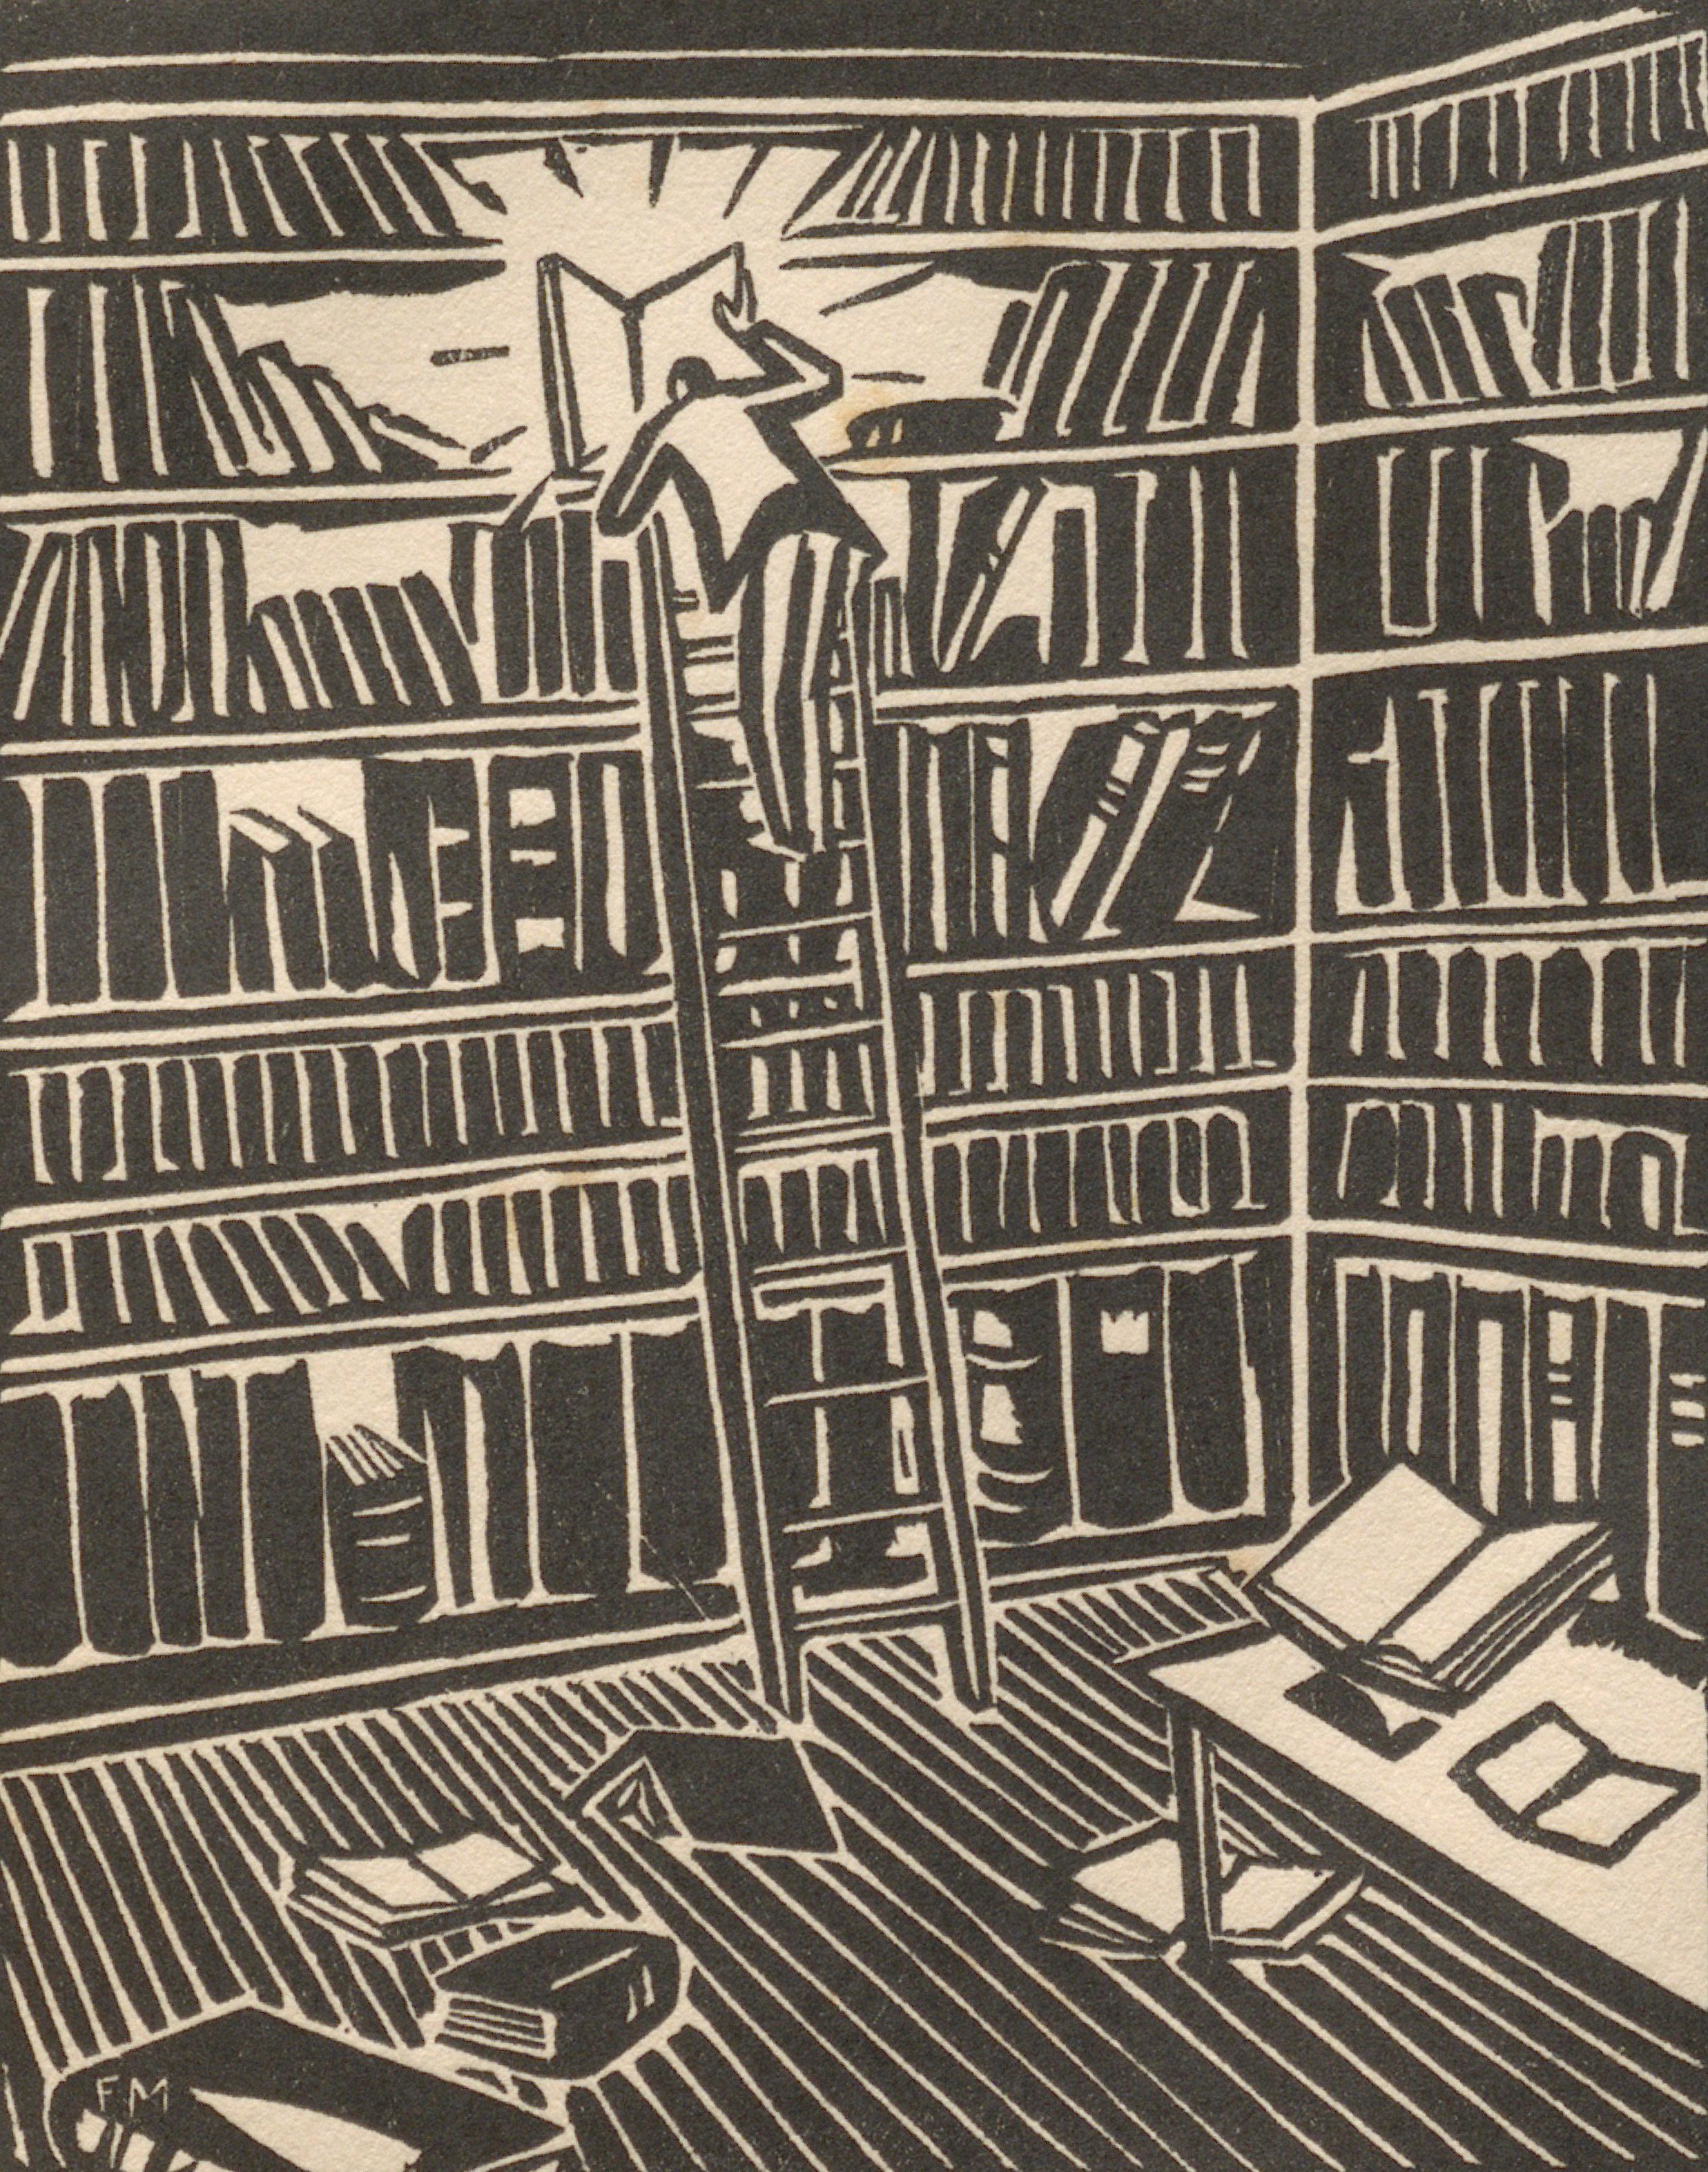 Image from a Frans Masereel novel: A man stands at the top of a library ladder, excitedly peering into a large book.